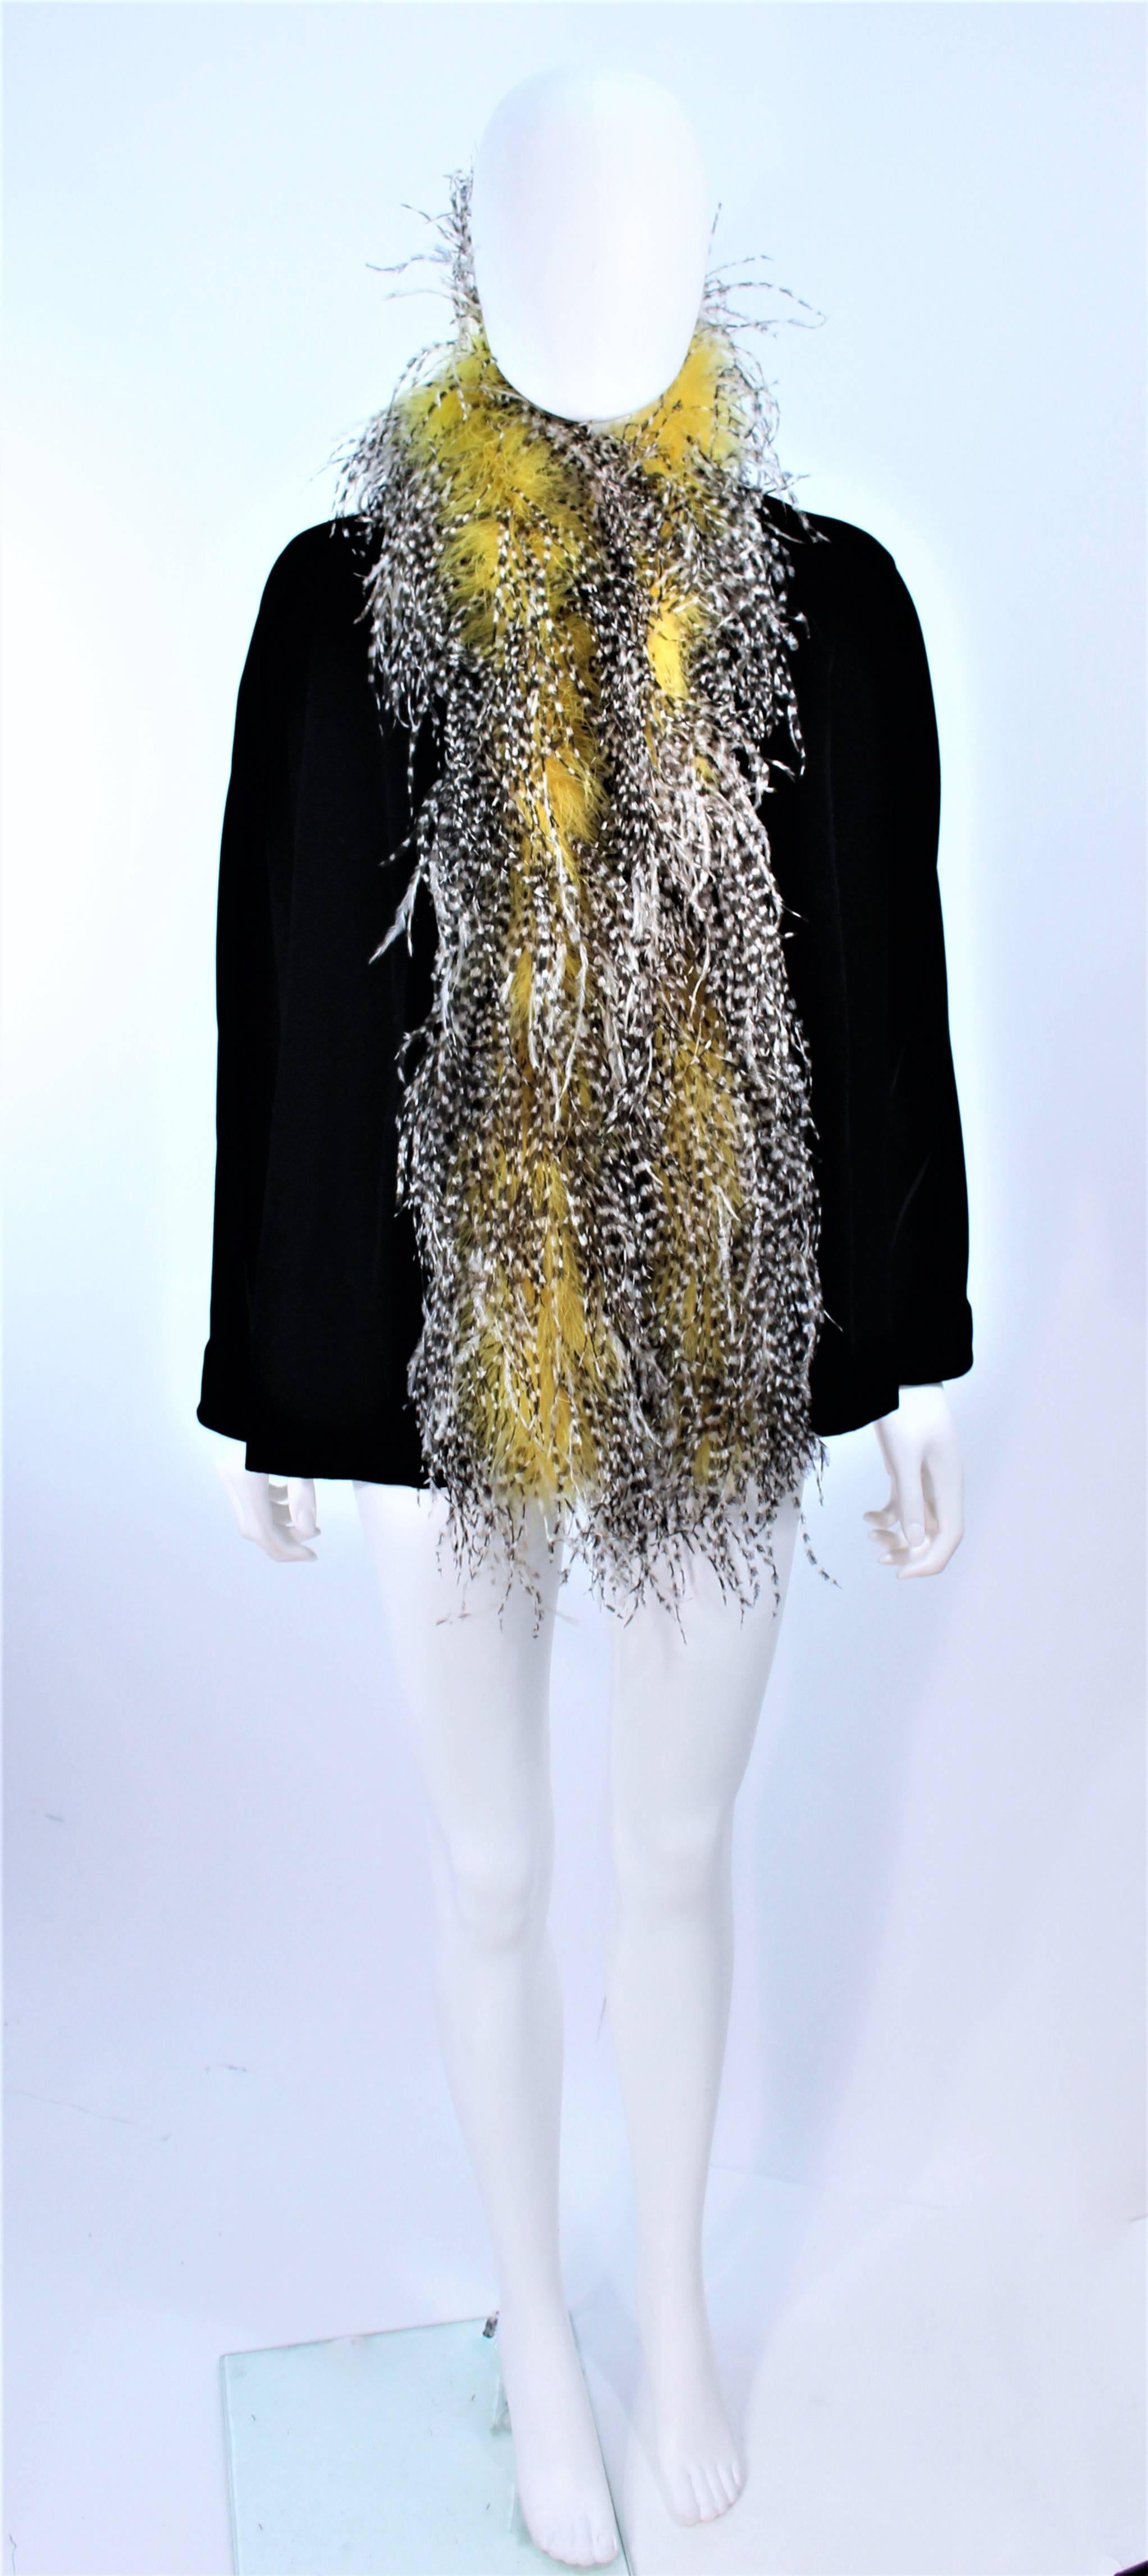 This Frank Tagnino design is composed of a black velvet and features a feather trim, in black, white, and yellow. Open draped style. In excellent pre-owned condition.

**Please cross-reference measurements for personal accuracy. Size in